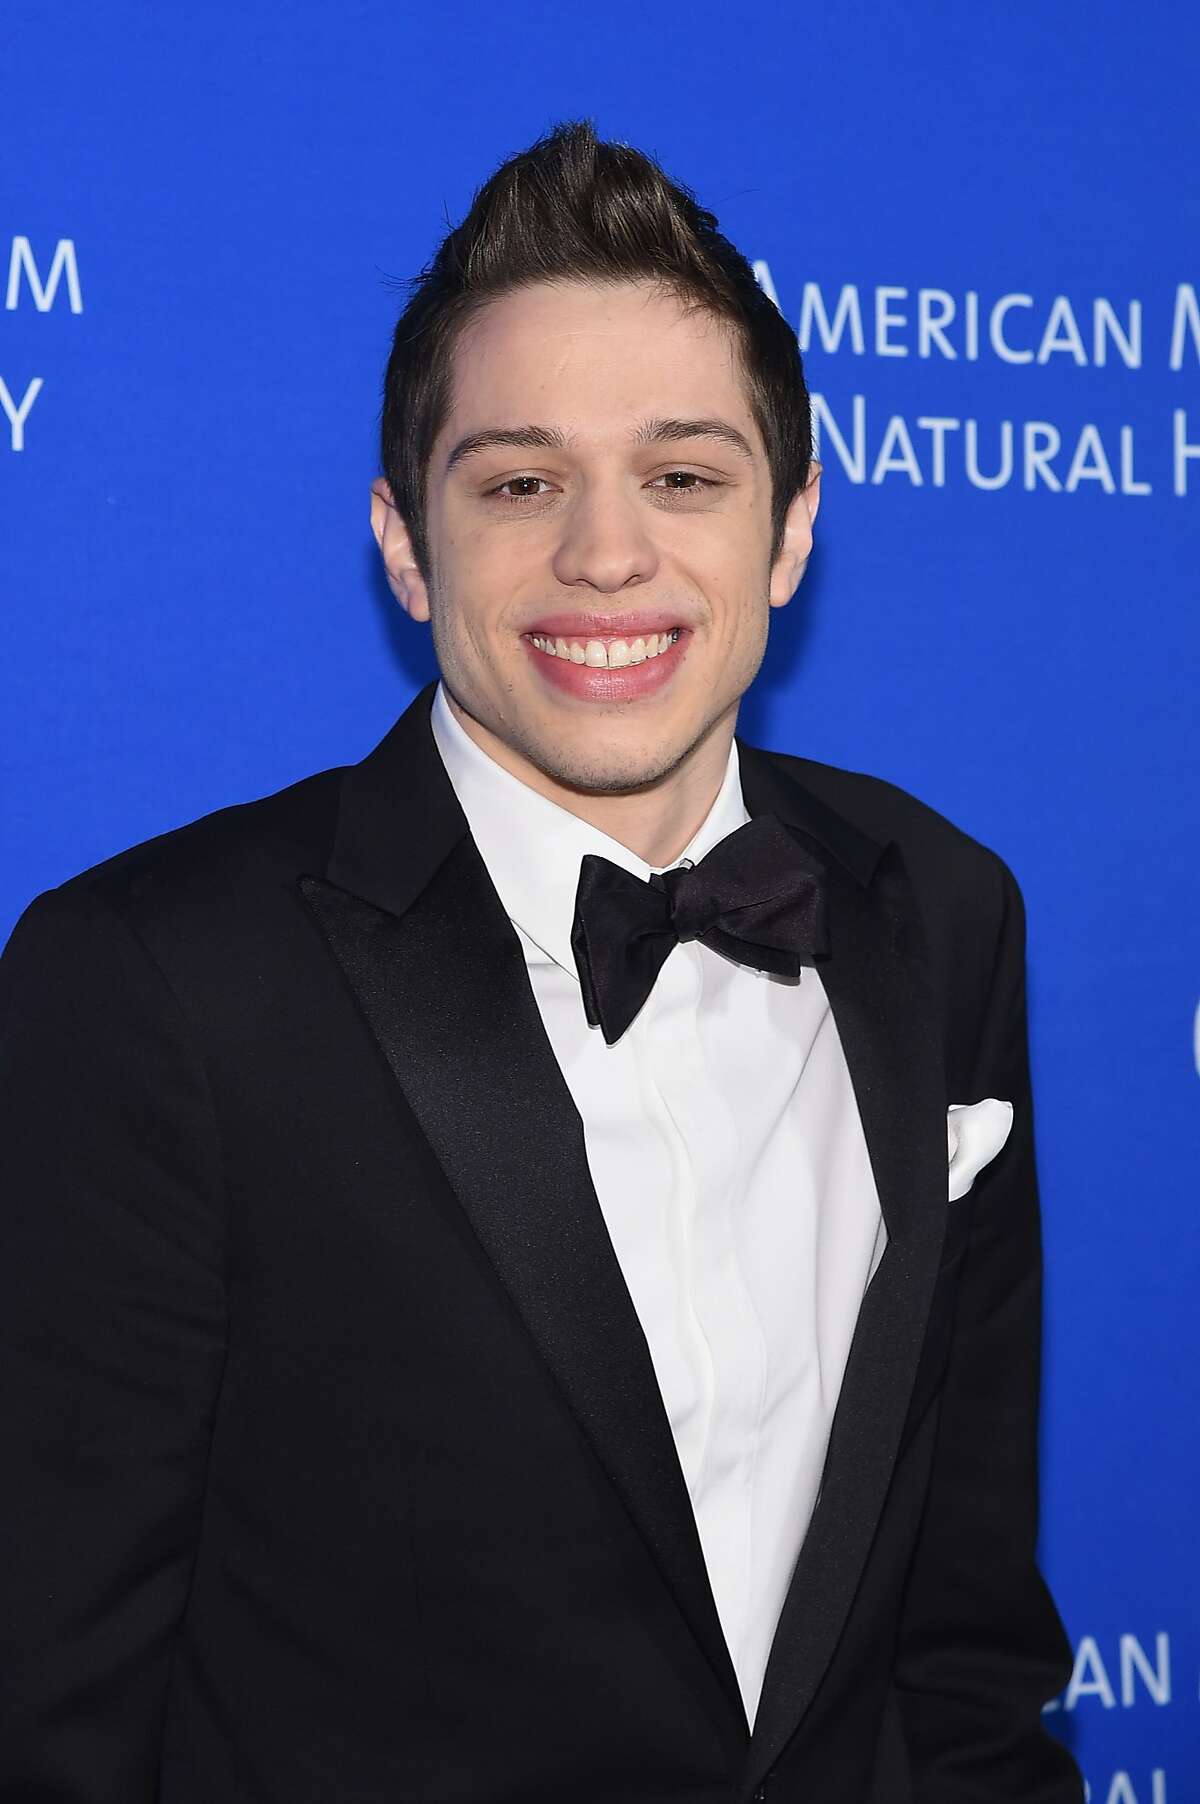 NEW YORK, NY - NOVEMBER 20: Pete Davidson attends the 2014 Museum Gala at American Museum of Natural History on November 20, 2014 in New York City. (Photo by Jamie McCarthy/Getty Images)